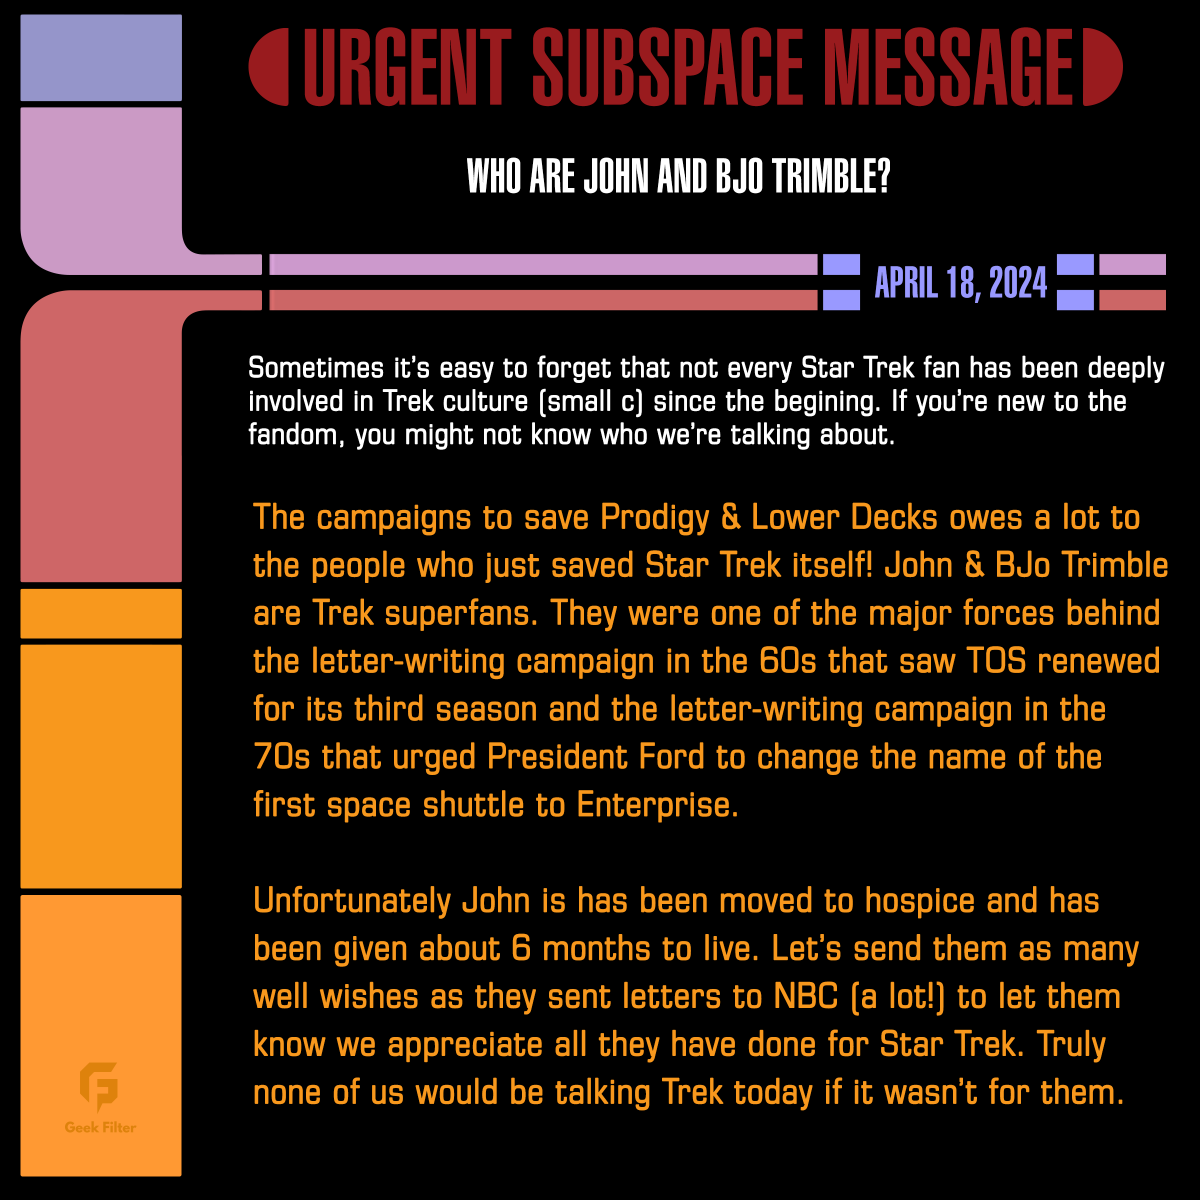 #StarTrek luminaries John & Bjo Trimble need our support. They helped TOS get a 3rd season by heading a massive letter writing campaign! They are the model for fans taking action. Sadly John is gravely ill and they could use some well wishes. Let's tell them what they mean to us!